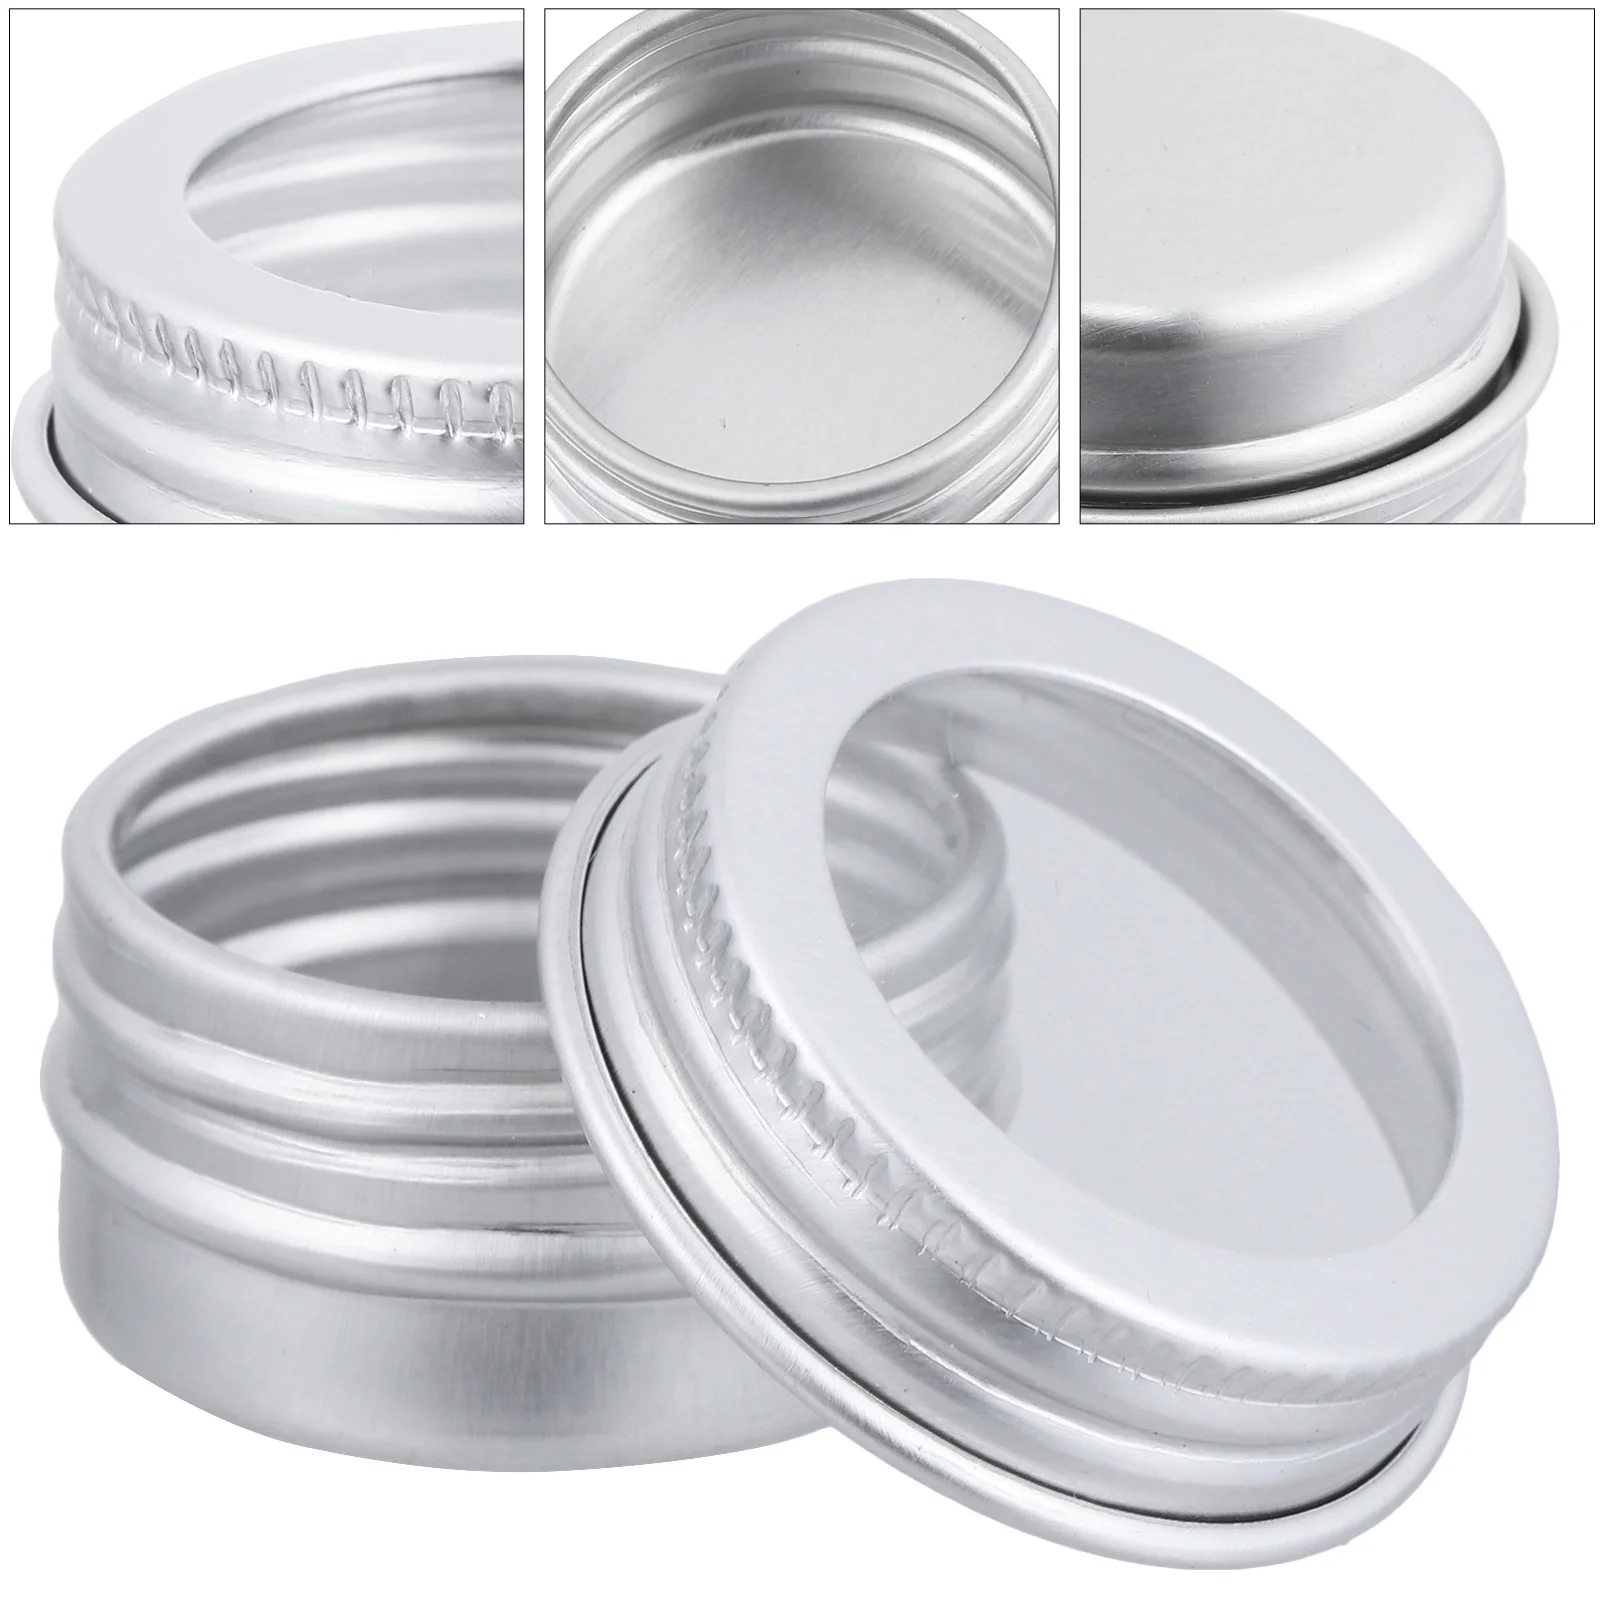 

15 Pcs Window Threaded Aluminum Box Cosmetics Container Product Travel Makeup Containers Sample Screw Lid Jar Miss